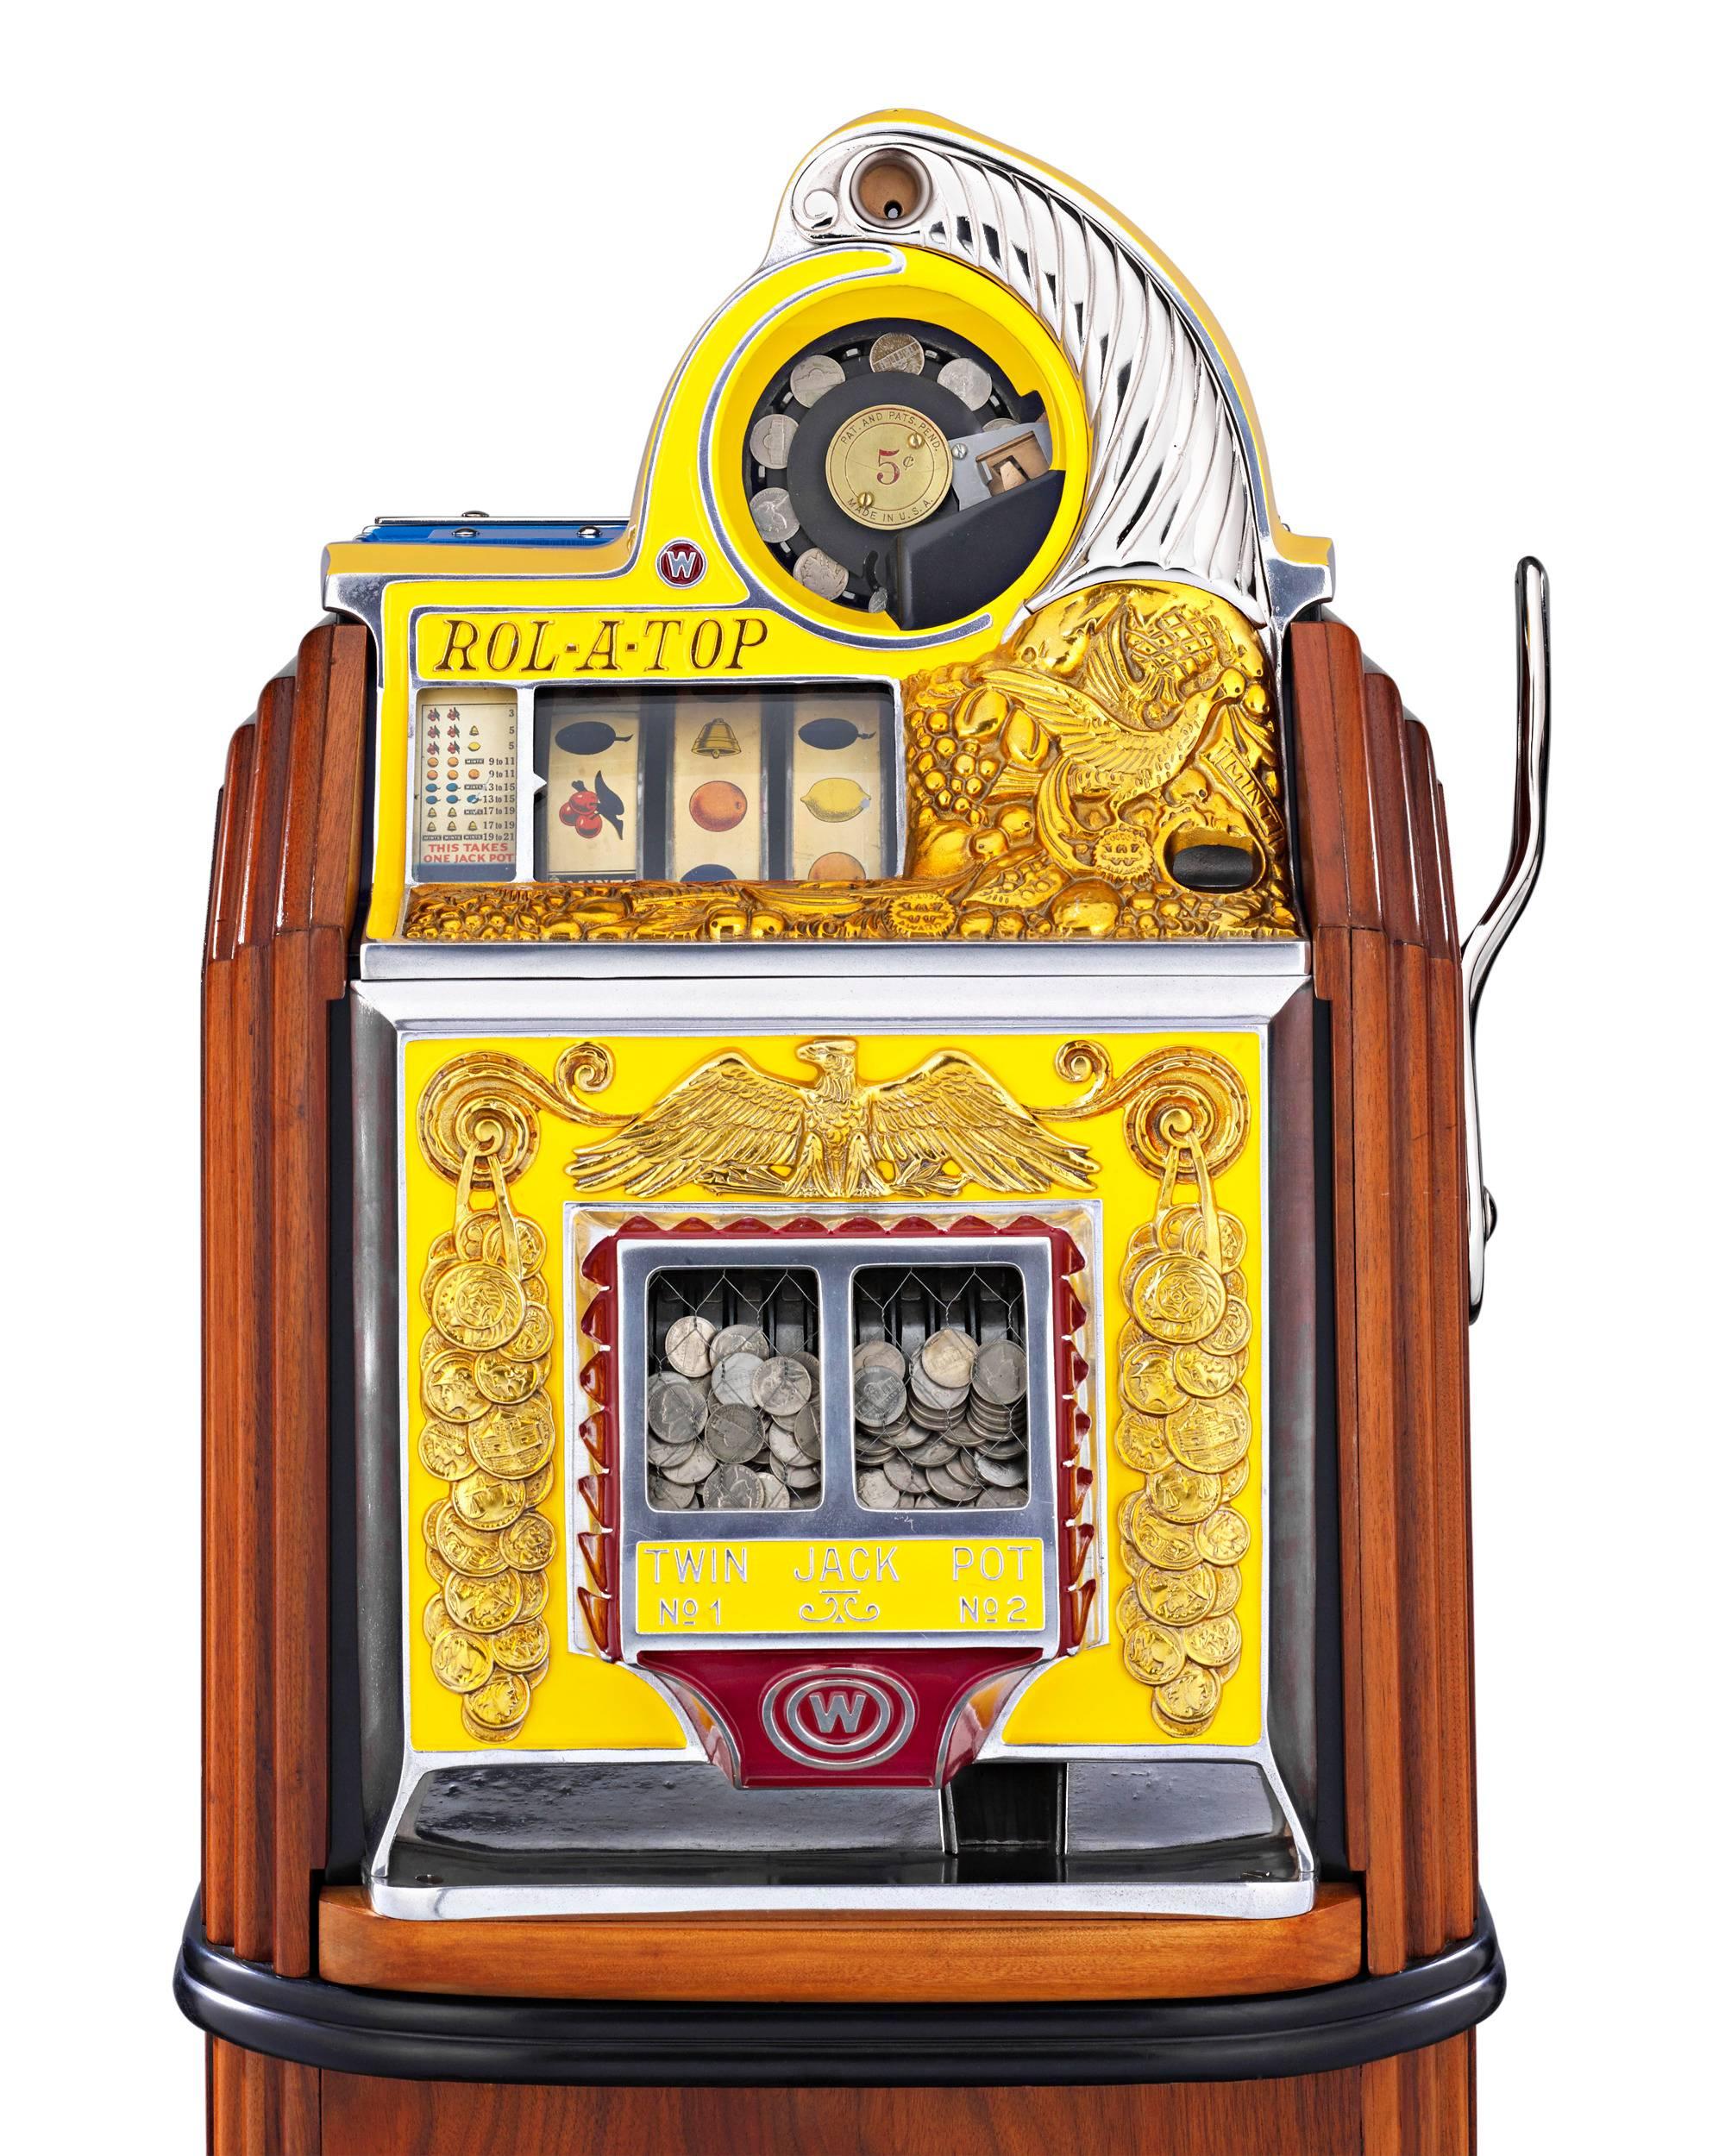 Extremely rare and highly desirable is this incredible Bird of Paradise console model of the famed Rol-A-Top slot machine. Introduced by Watling Manufacturing Company of Chicago in 1935, the Rol-A-Top was one of the most glamorous machines of the